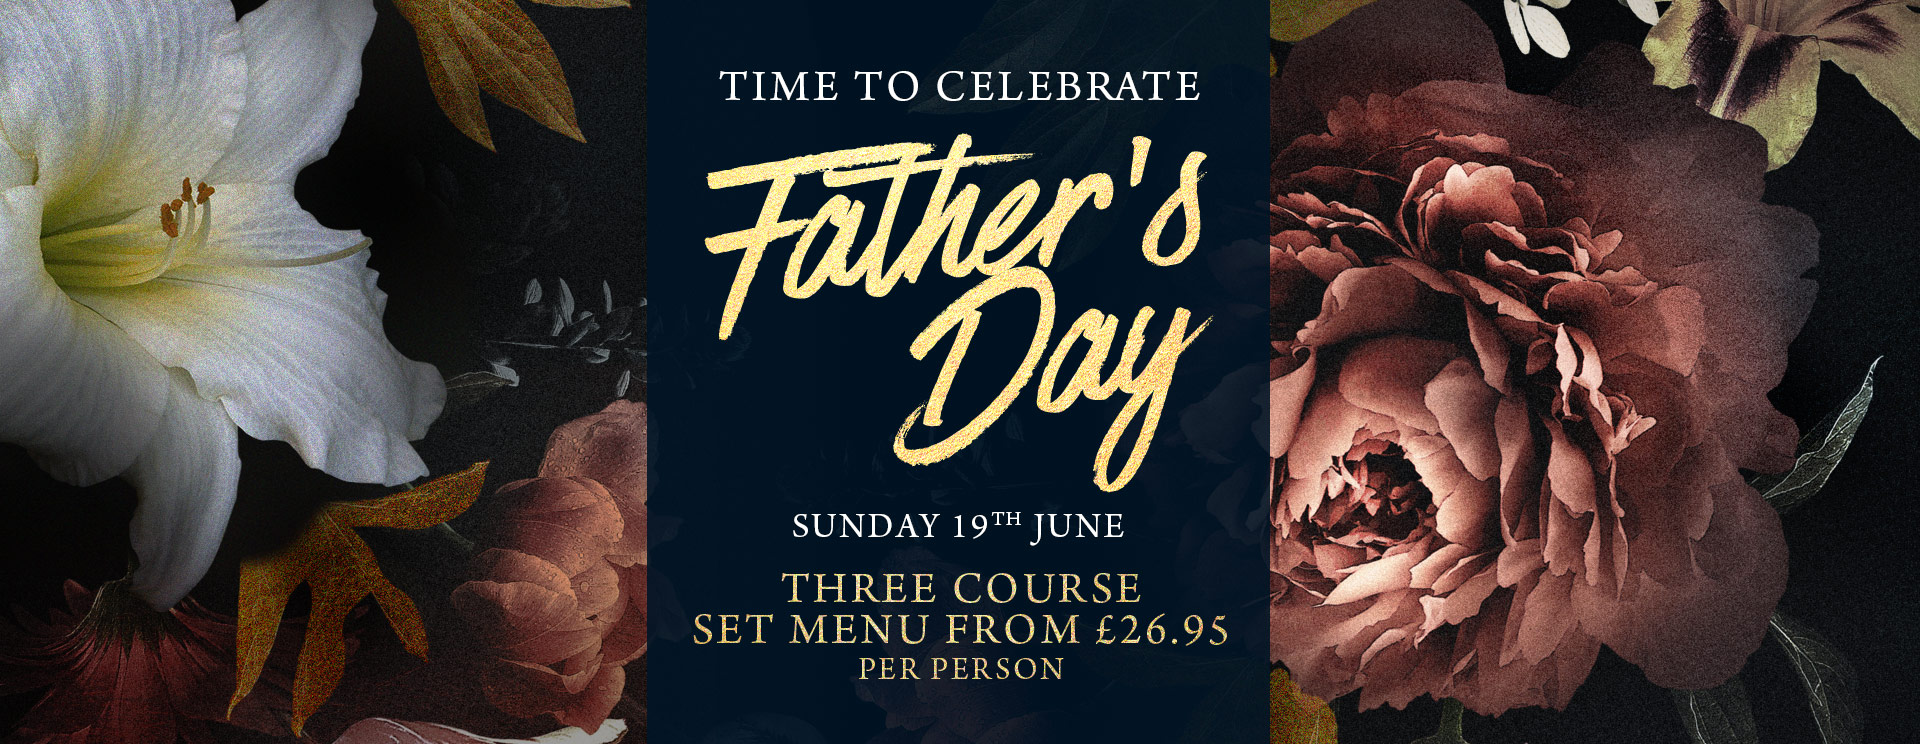 Fathers Day at The Chilworth Arms